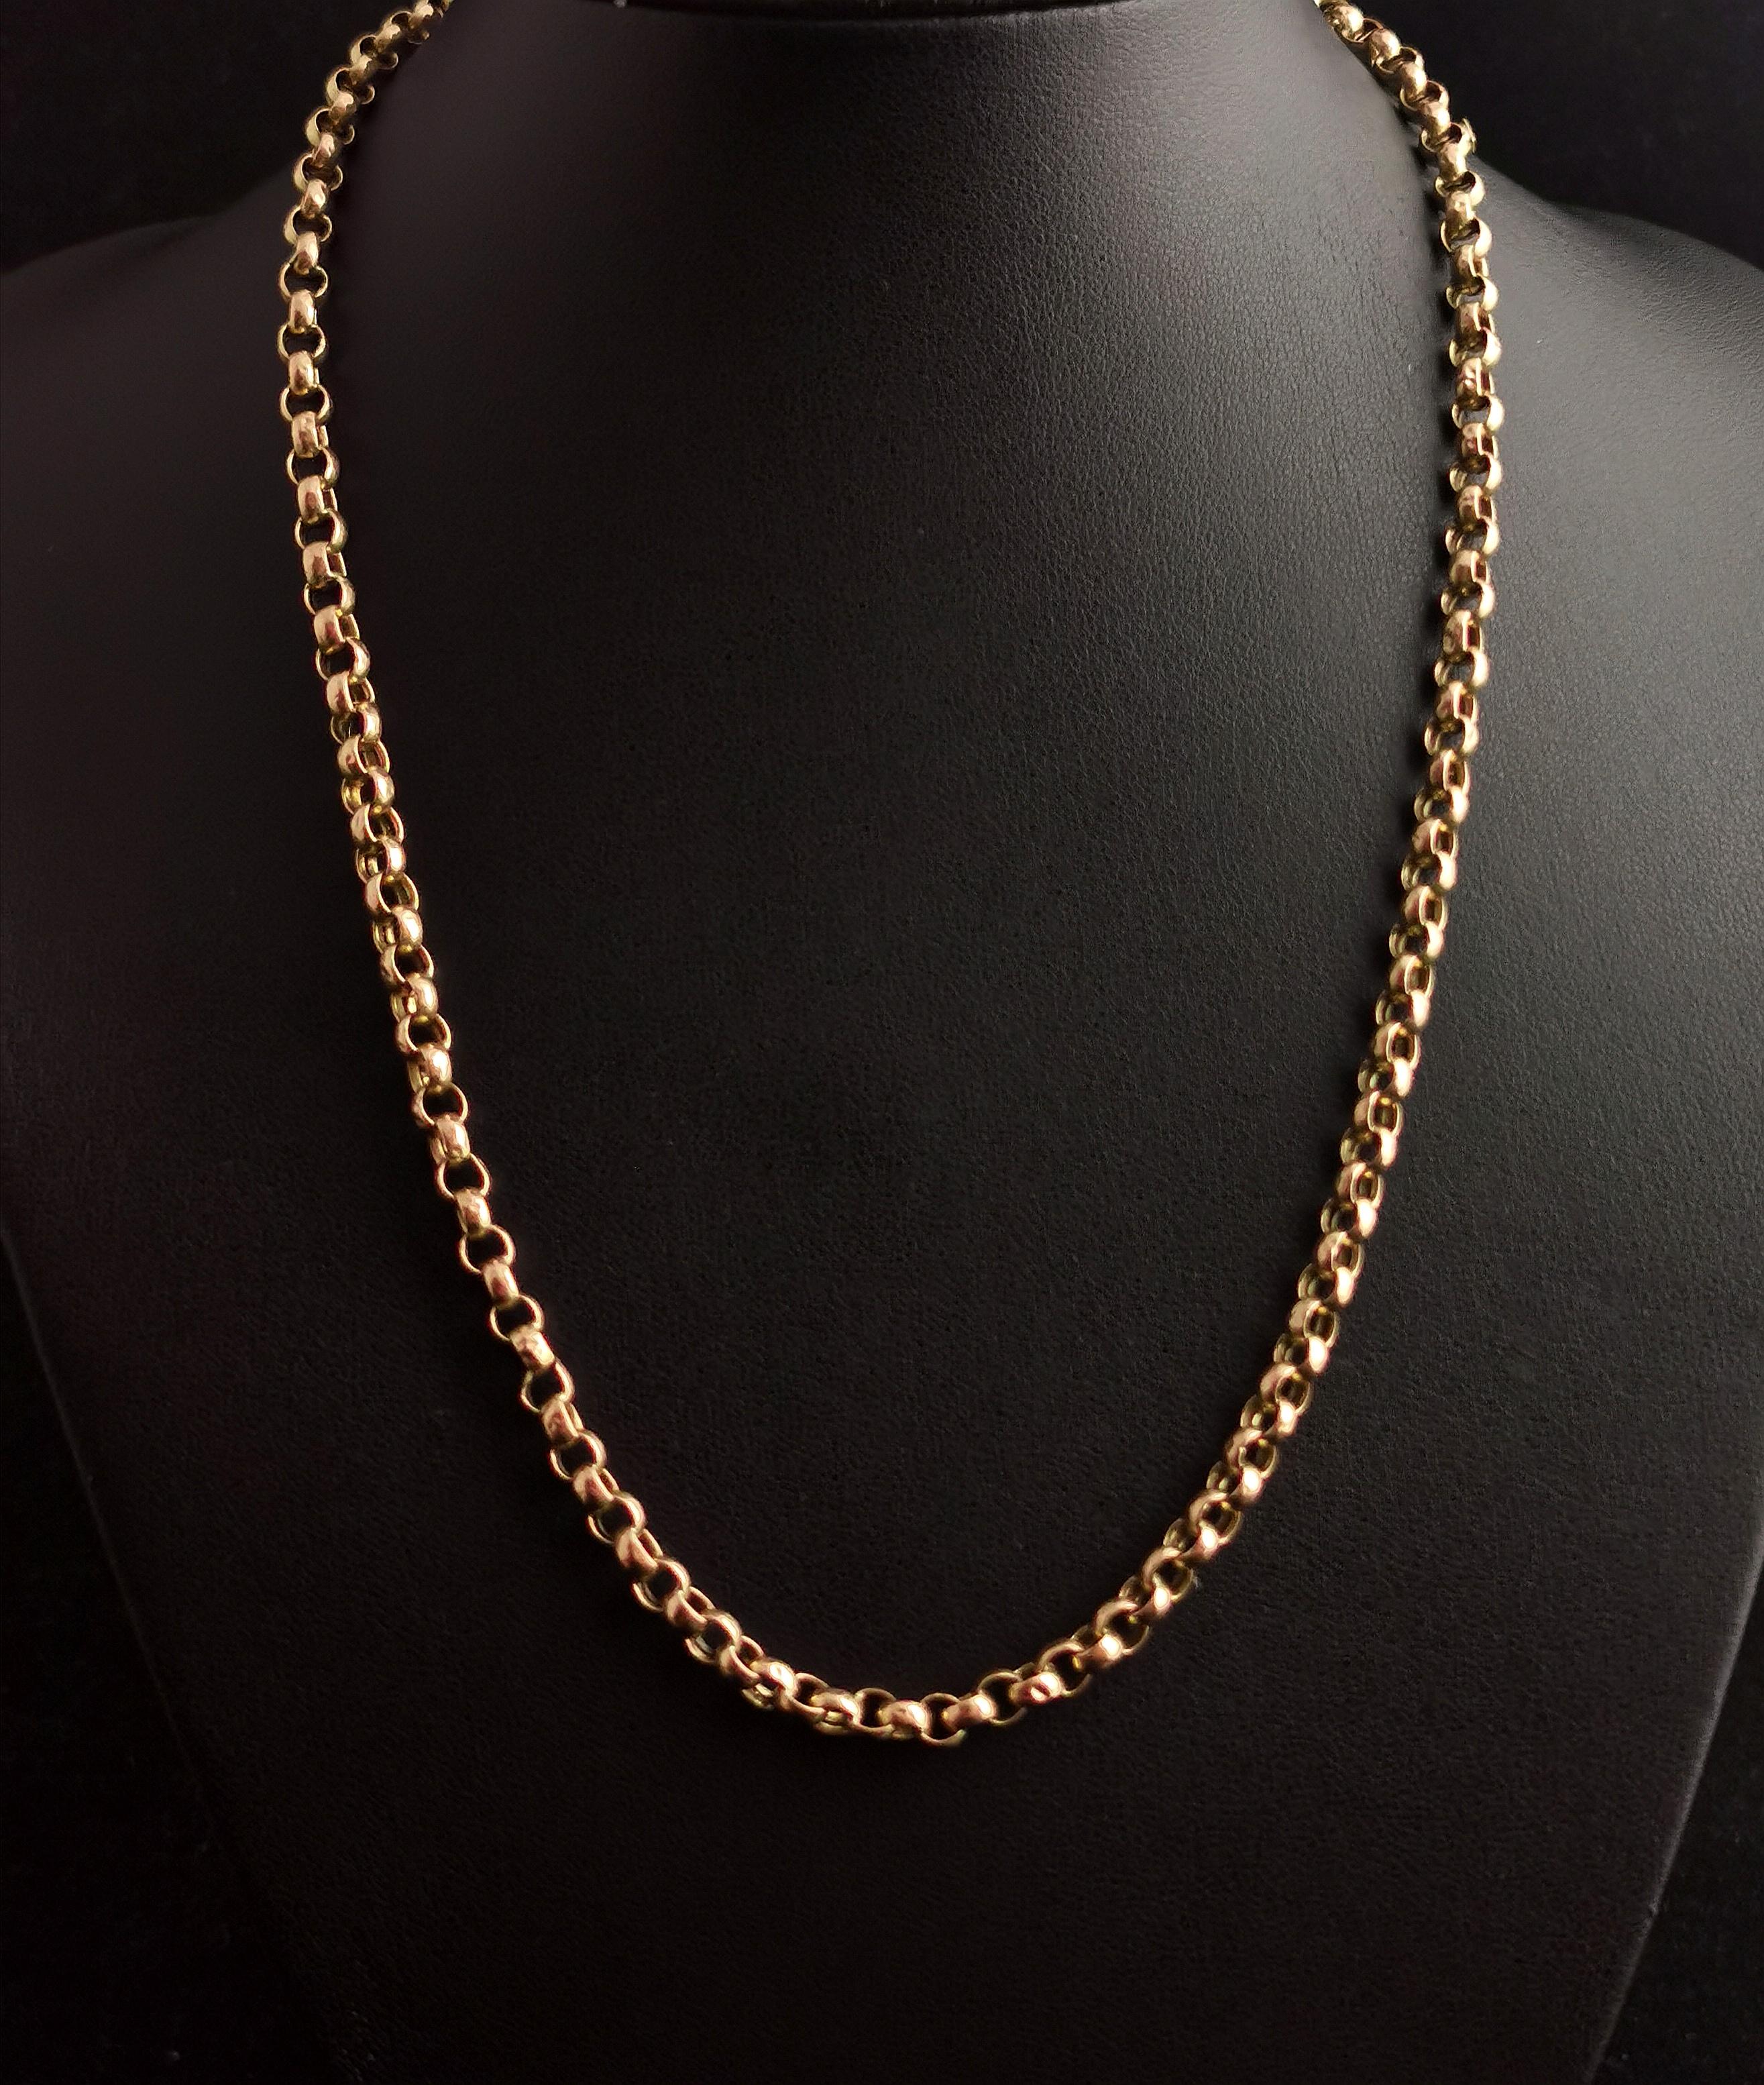 A beautiful antique, Edwardian era 9kt gold Belcher or rolo link chain necklace.

Rich yellow gold links with a round design link, it appears quite a chunky chain as it has wider links.

Perfect for adding your favourite charms, pendants or lockets,